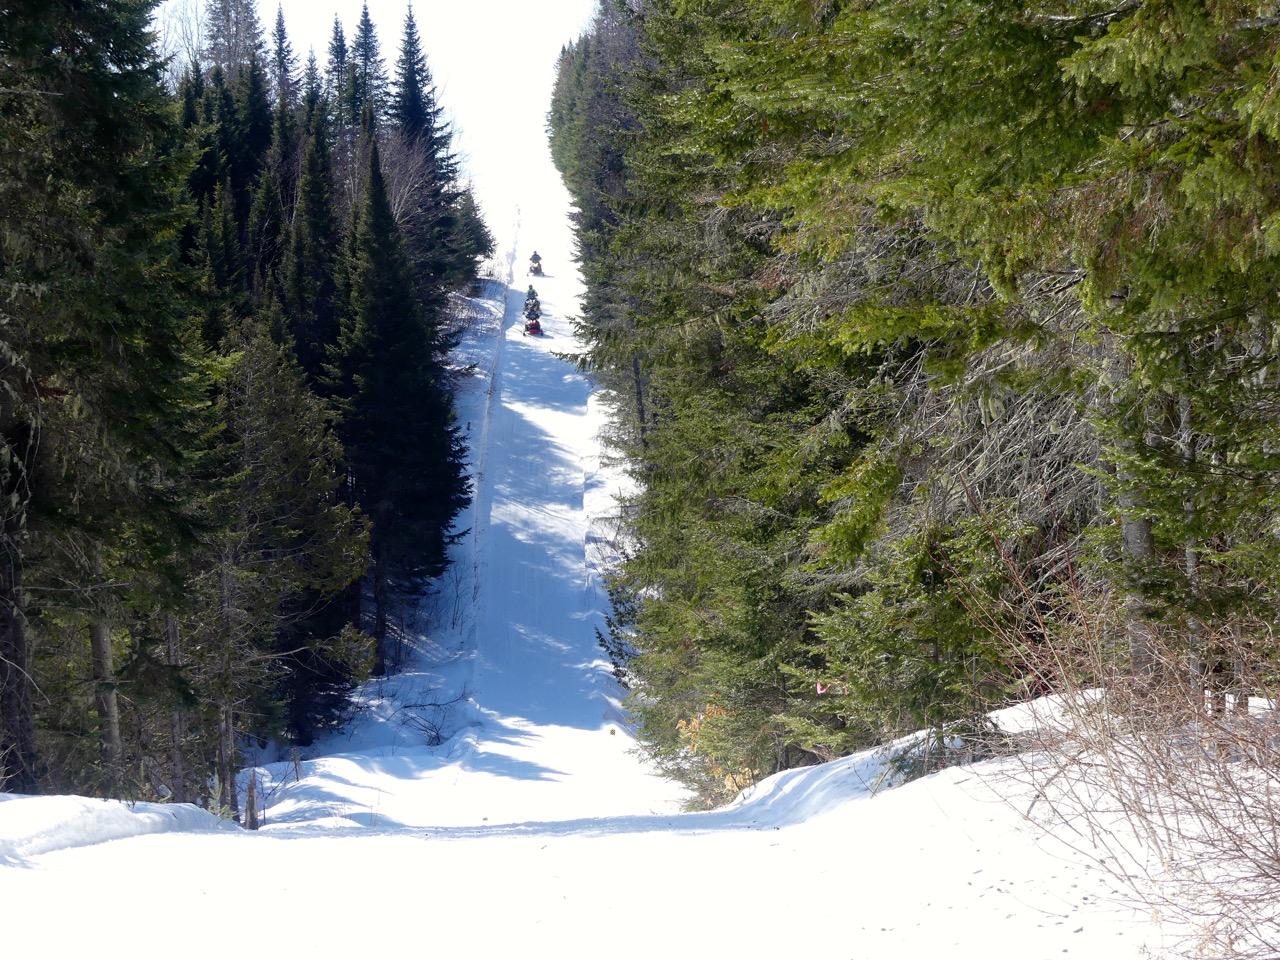 The border trail is a long straight trail in most parts.